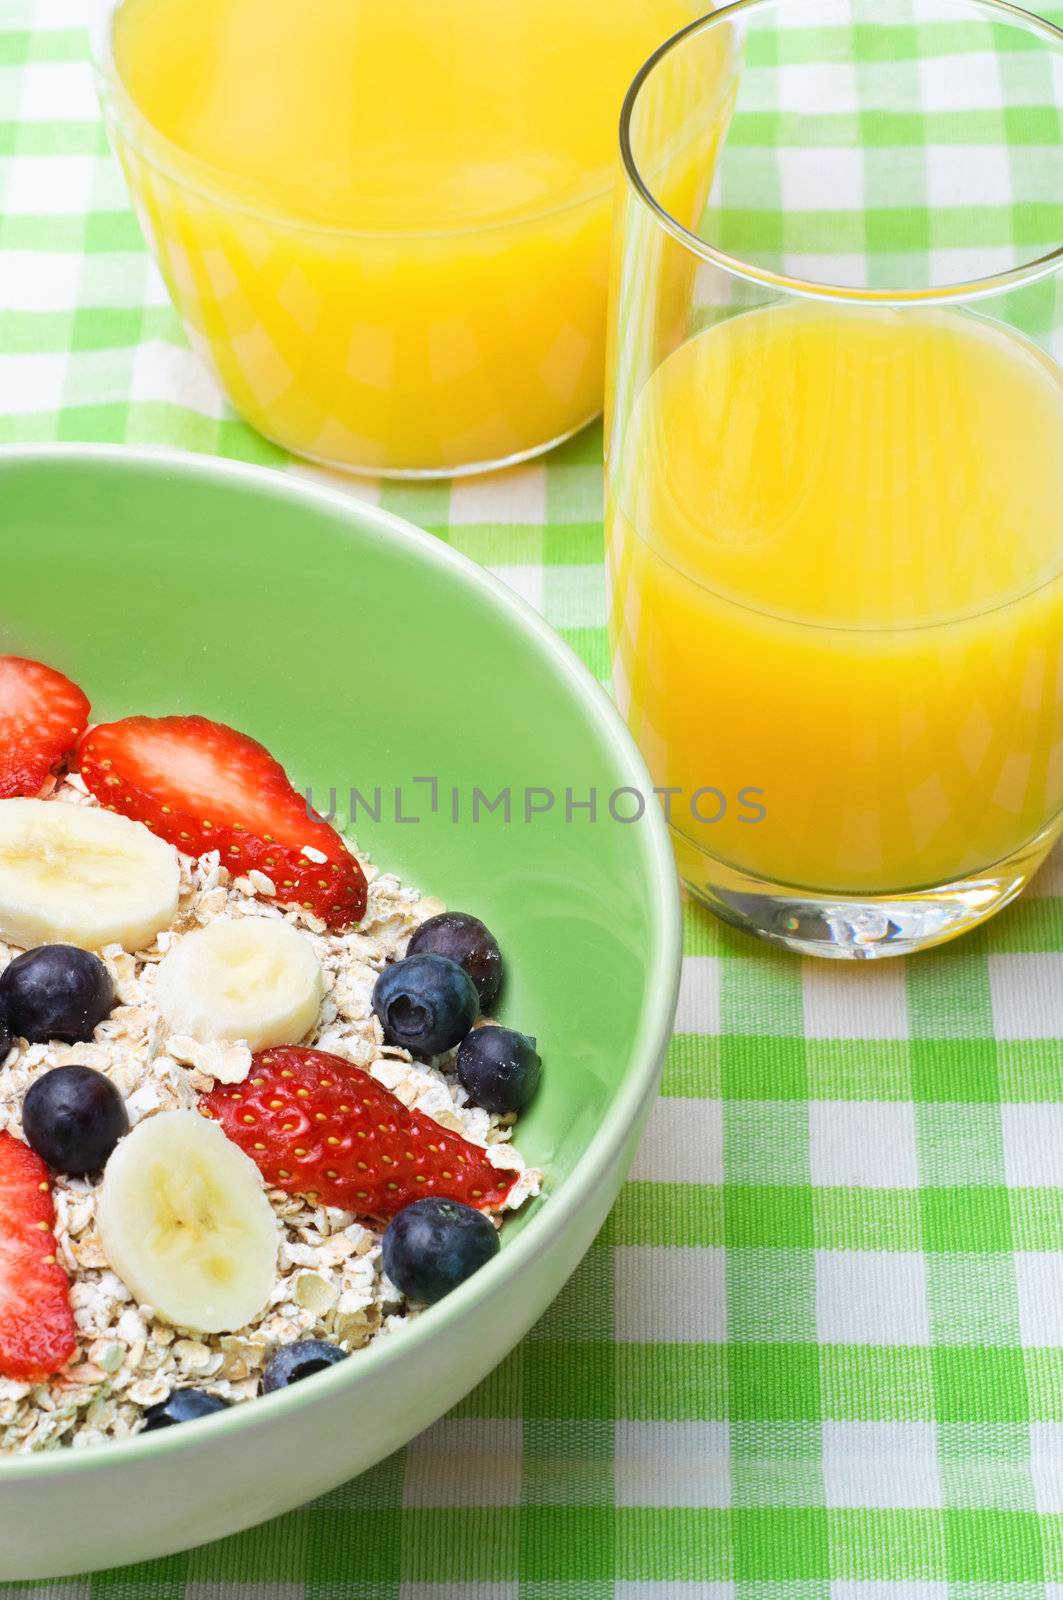 A breakfast setting with a bowl of fresh fruit and oats muesli and orange juice on a green and white gingham tablecloth.